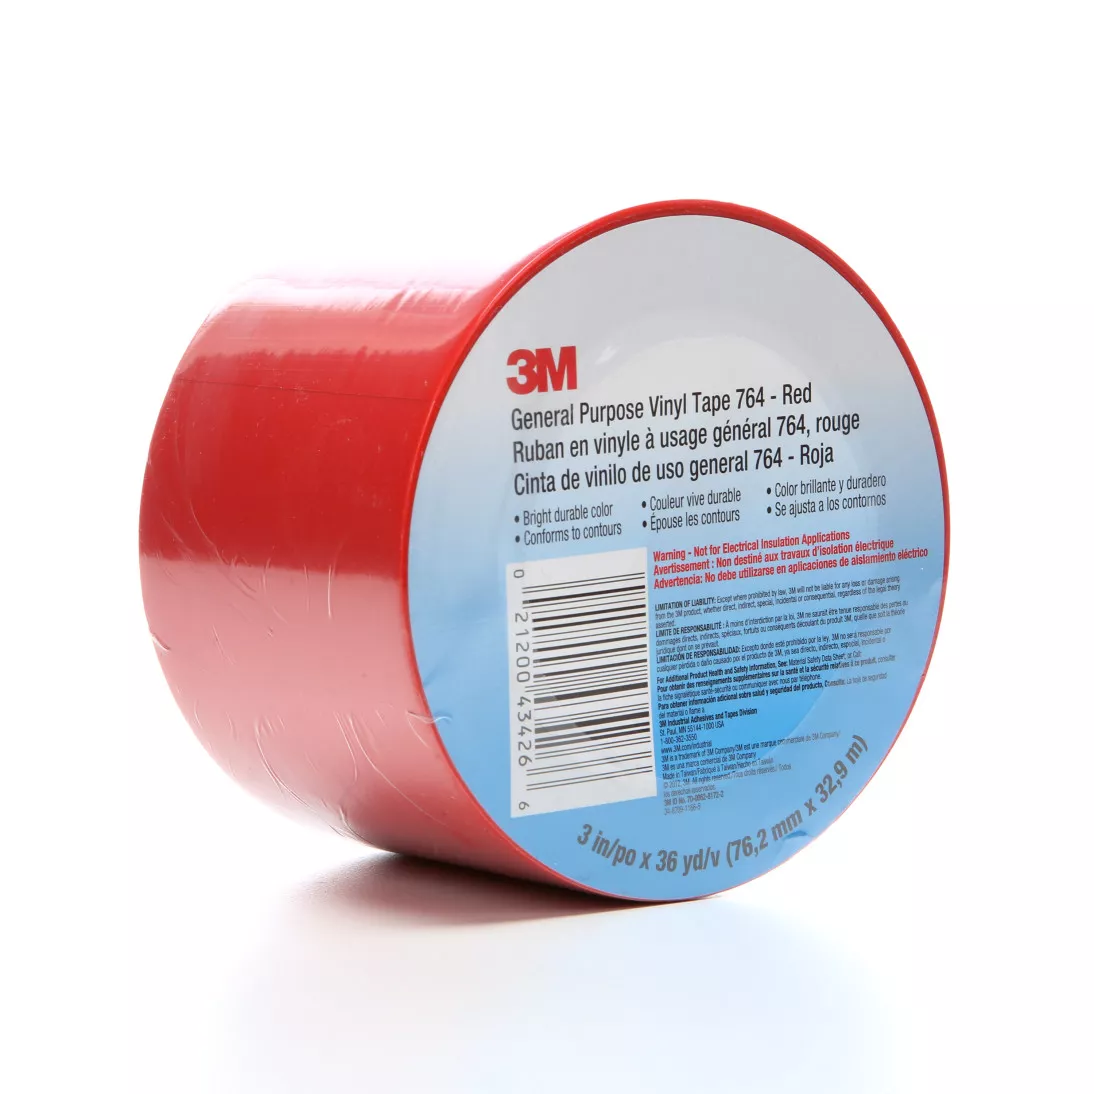 3M™ General Purpose Vinyl Tape 764, Red, 3 in x 36 yd, 5 mil, 12 Roll/Case, Individually Wrapped Conveniently Packaged